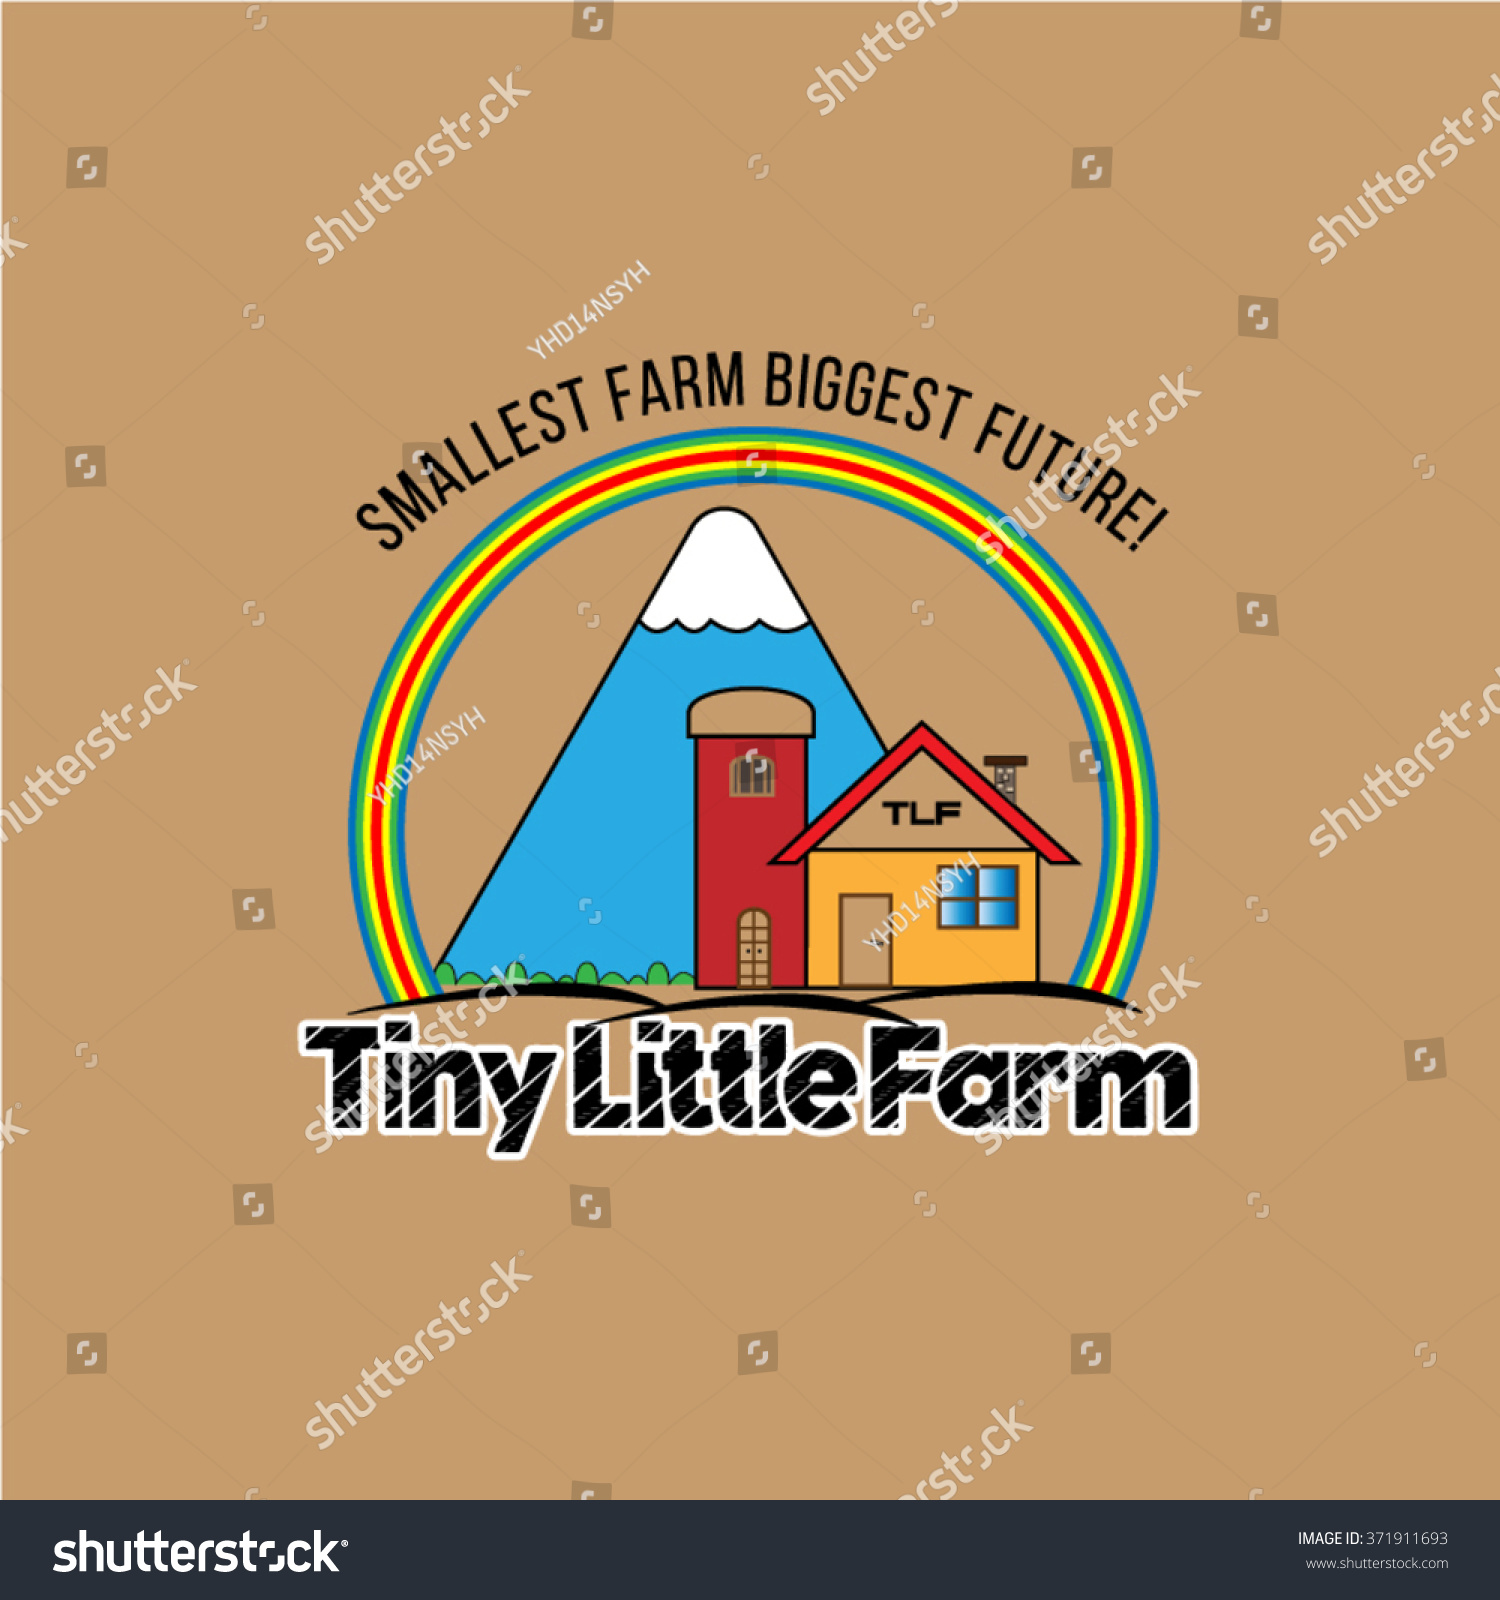 Tiny little farm, farm's icon with brown background #371911693